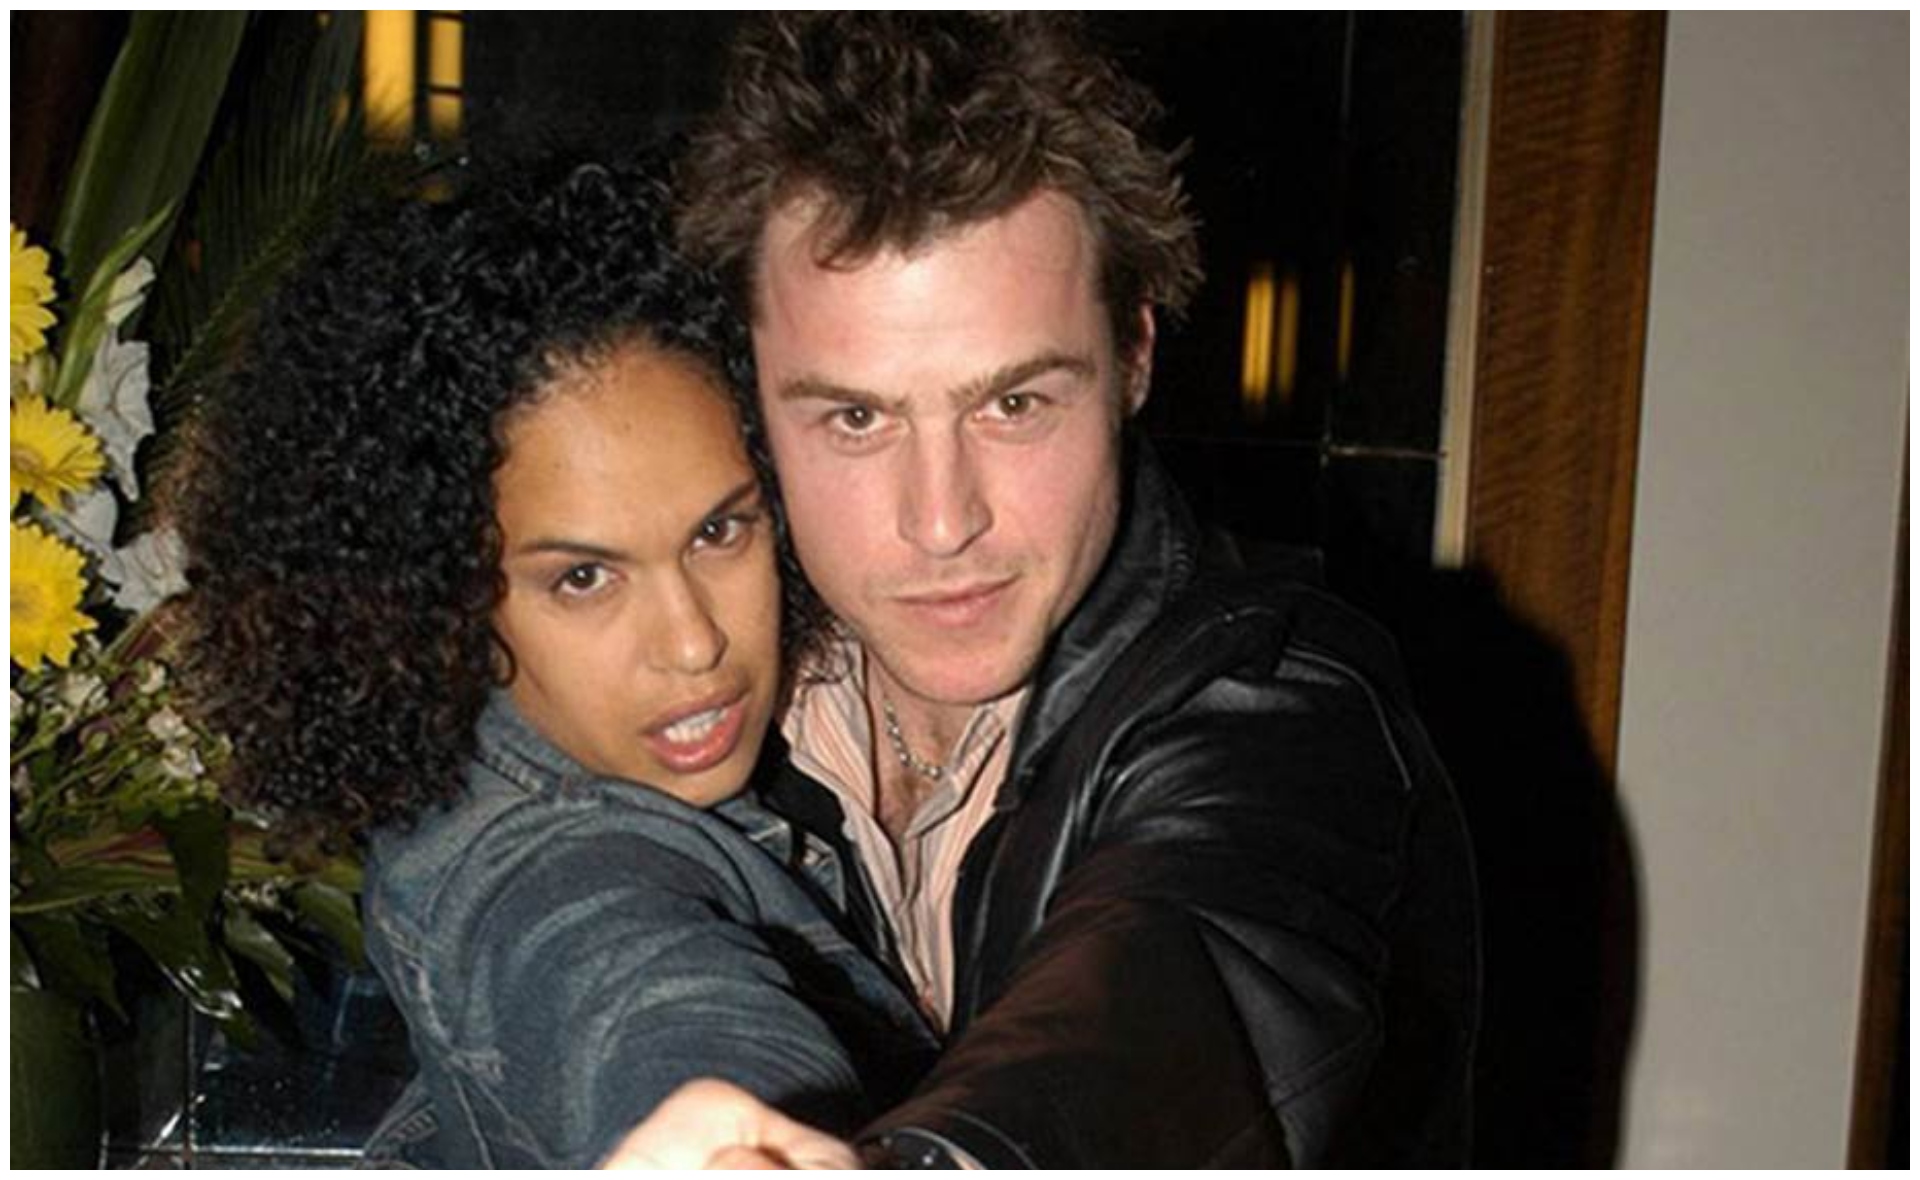 Former partners Christine Anu & Rodger Corser reunite with a nostalgic reminder of their very first meeting